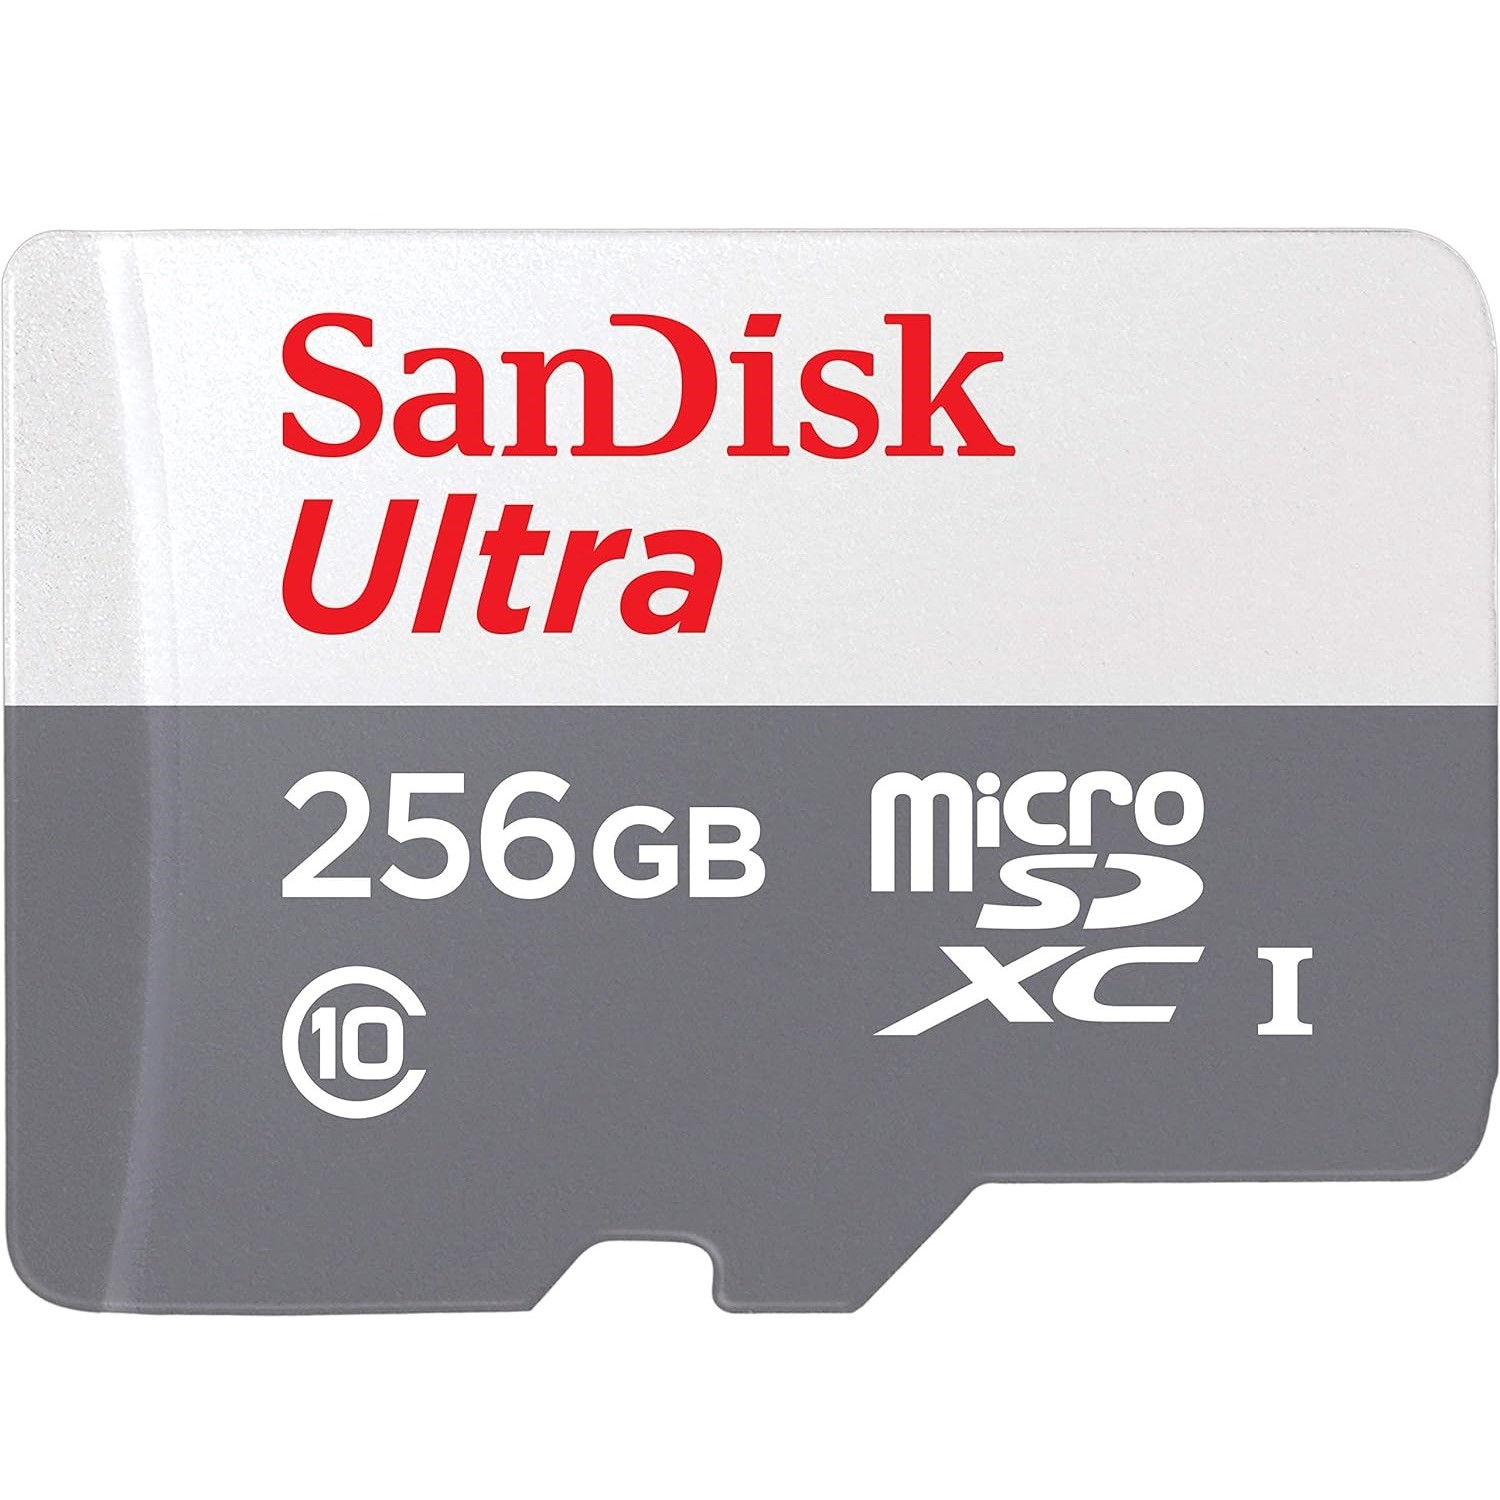 SanDisk Made for Amazon 256GB microSD Memory Card